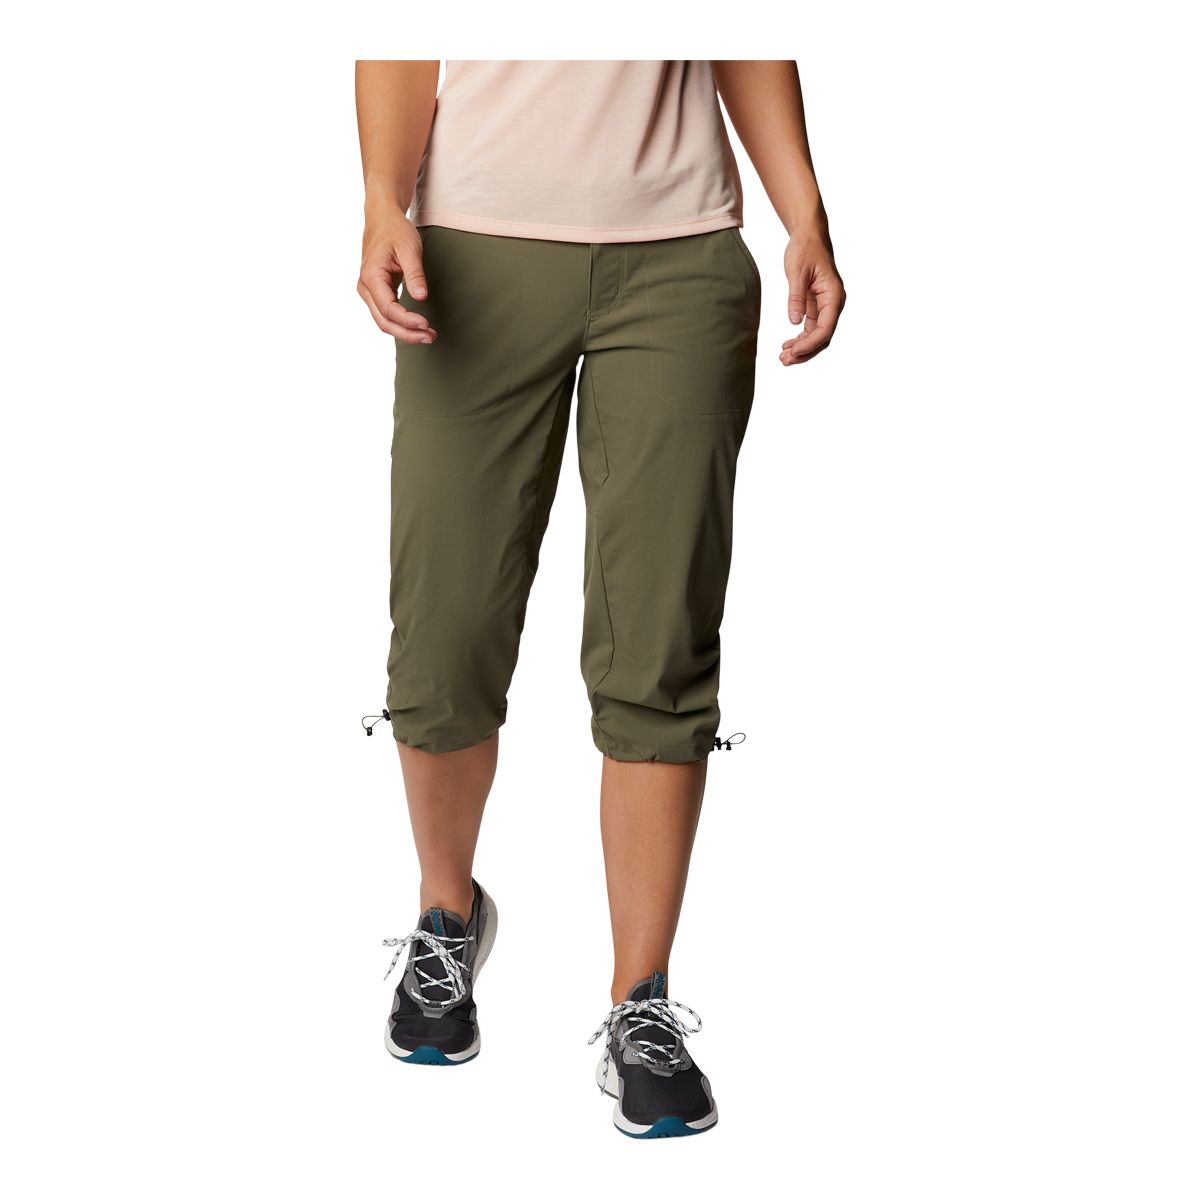 https://media-www.atmosphere.ca/product/div-03-softgoods/dpt-72-casual-clothing/sdpt-02-womens/333408176/columbia-w-saturday-trail-ii-stone-green-2--a816dc05-5048-4313-b10d-75cca28e2d00-jpgrendition.jpg